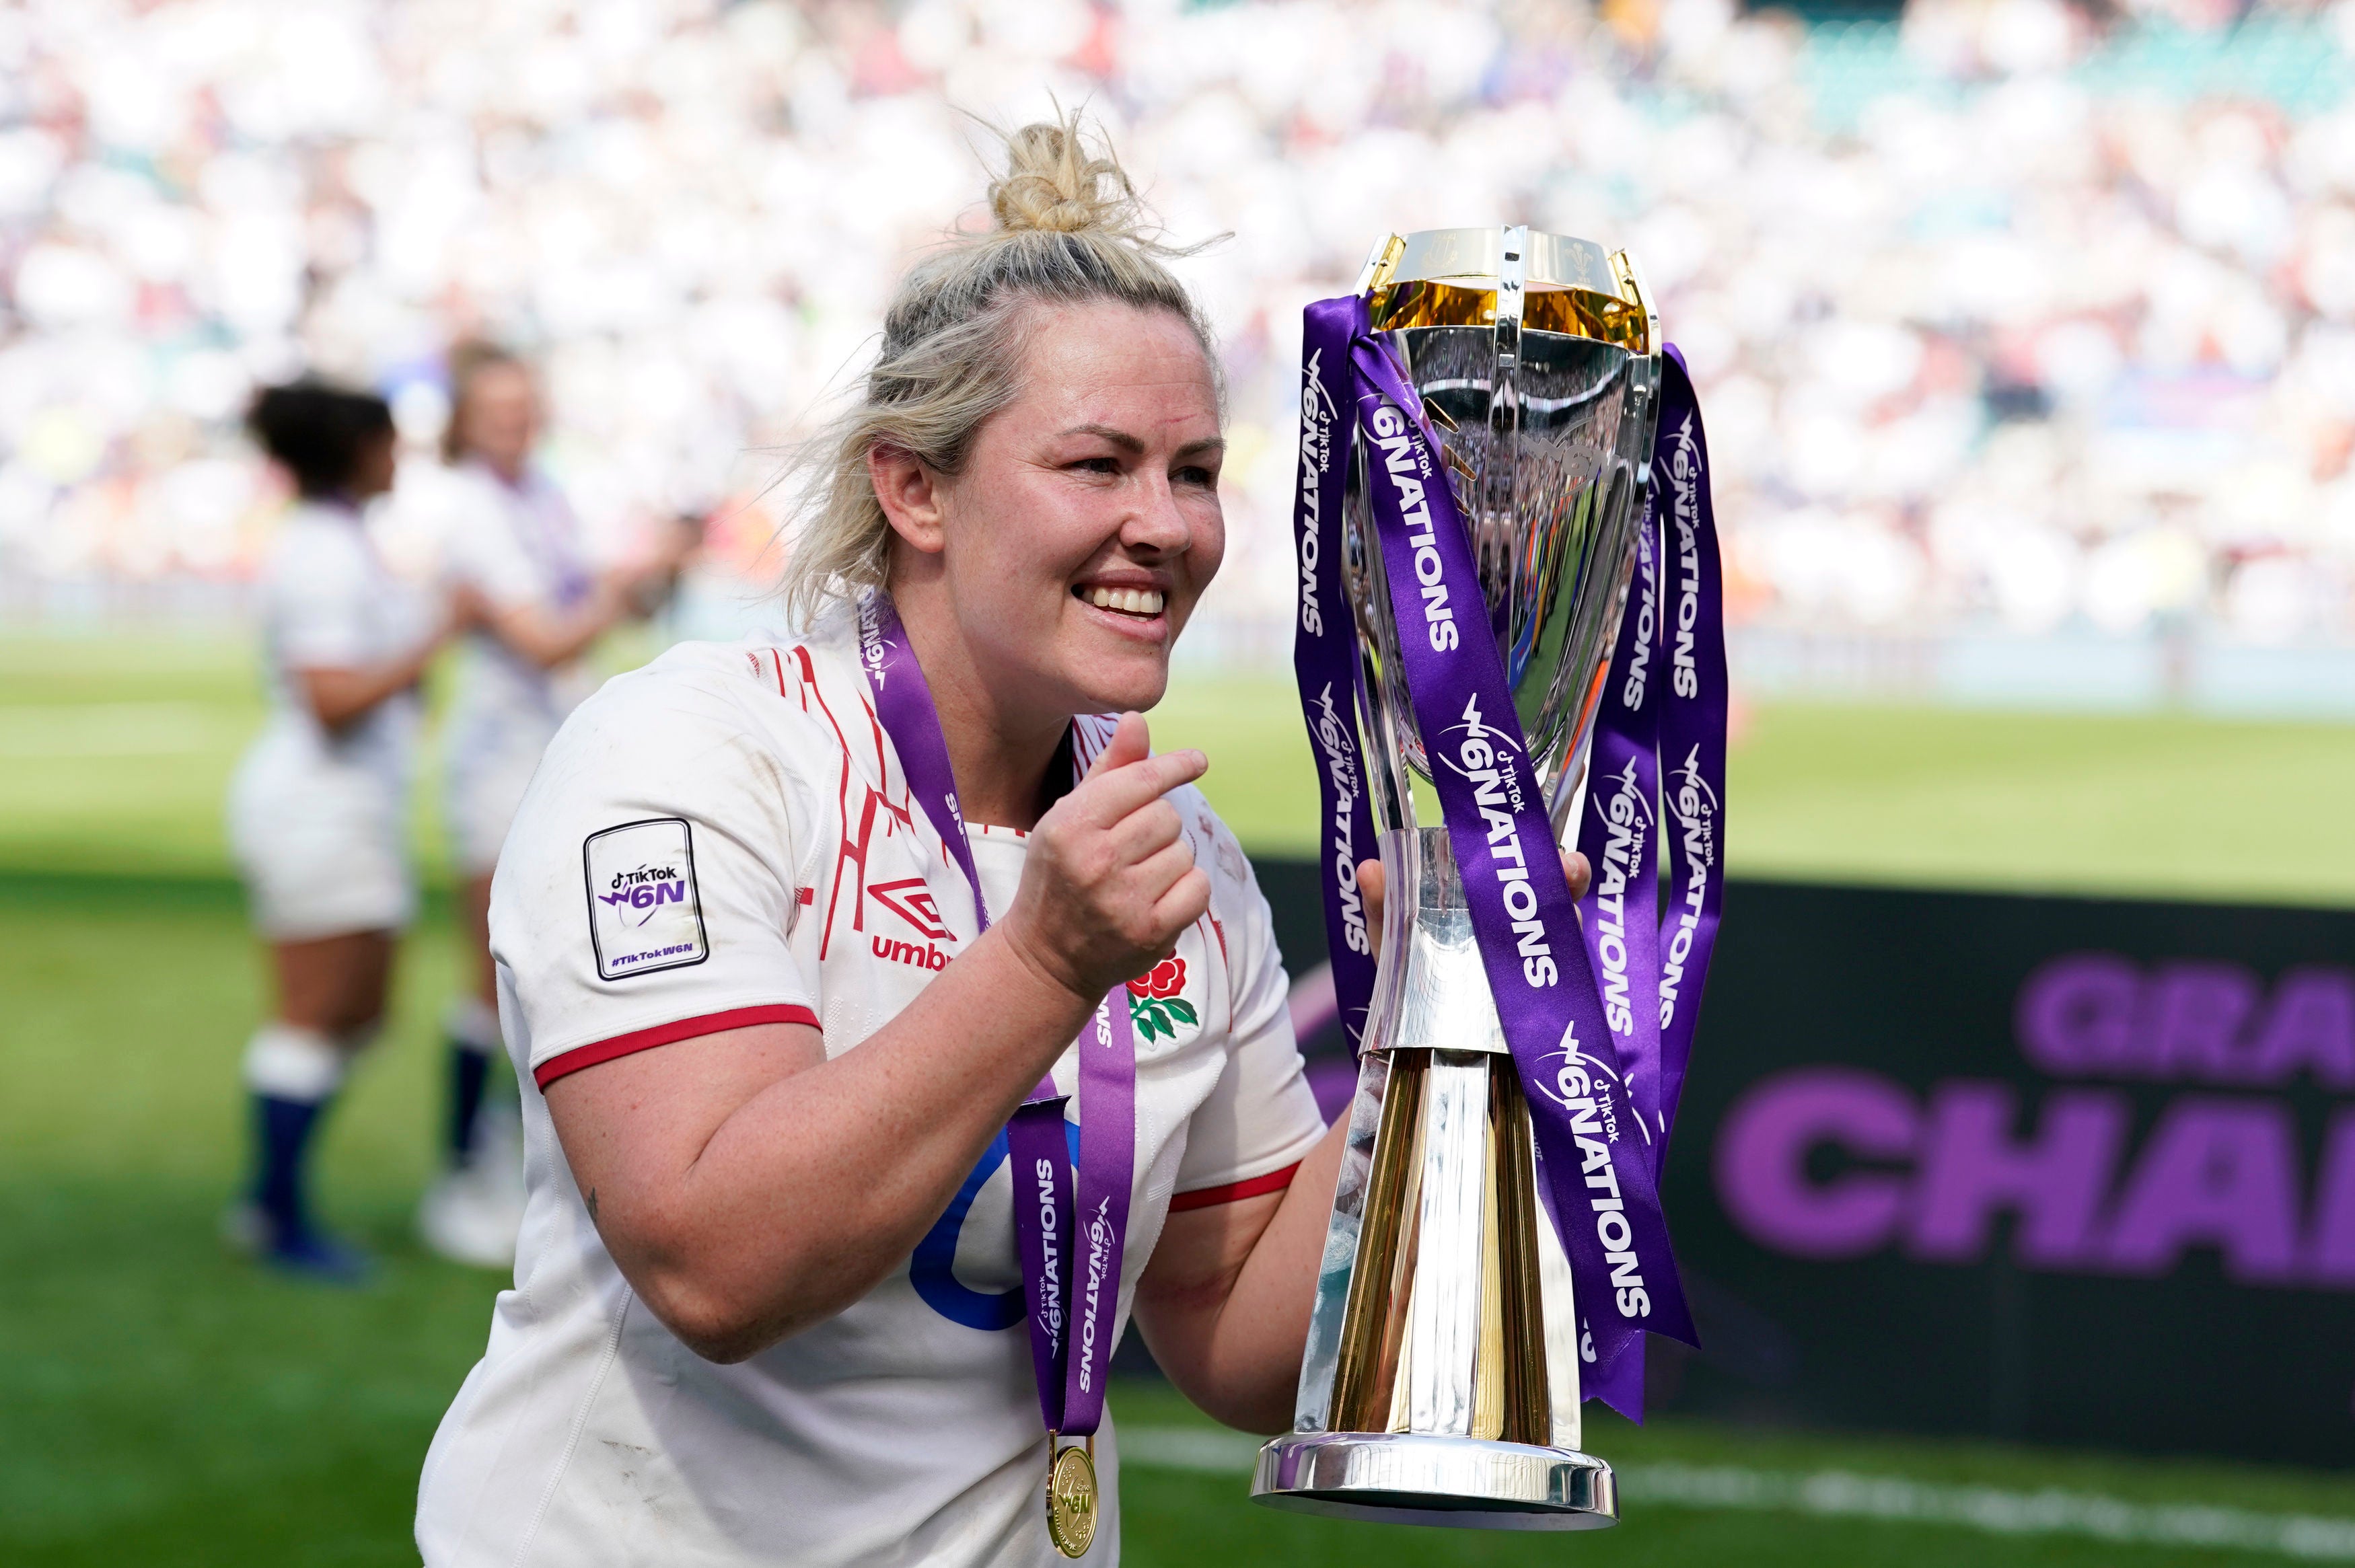 Marlie Packer led England to another Six Nations crown last year